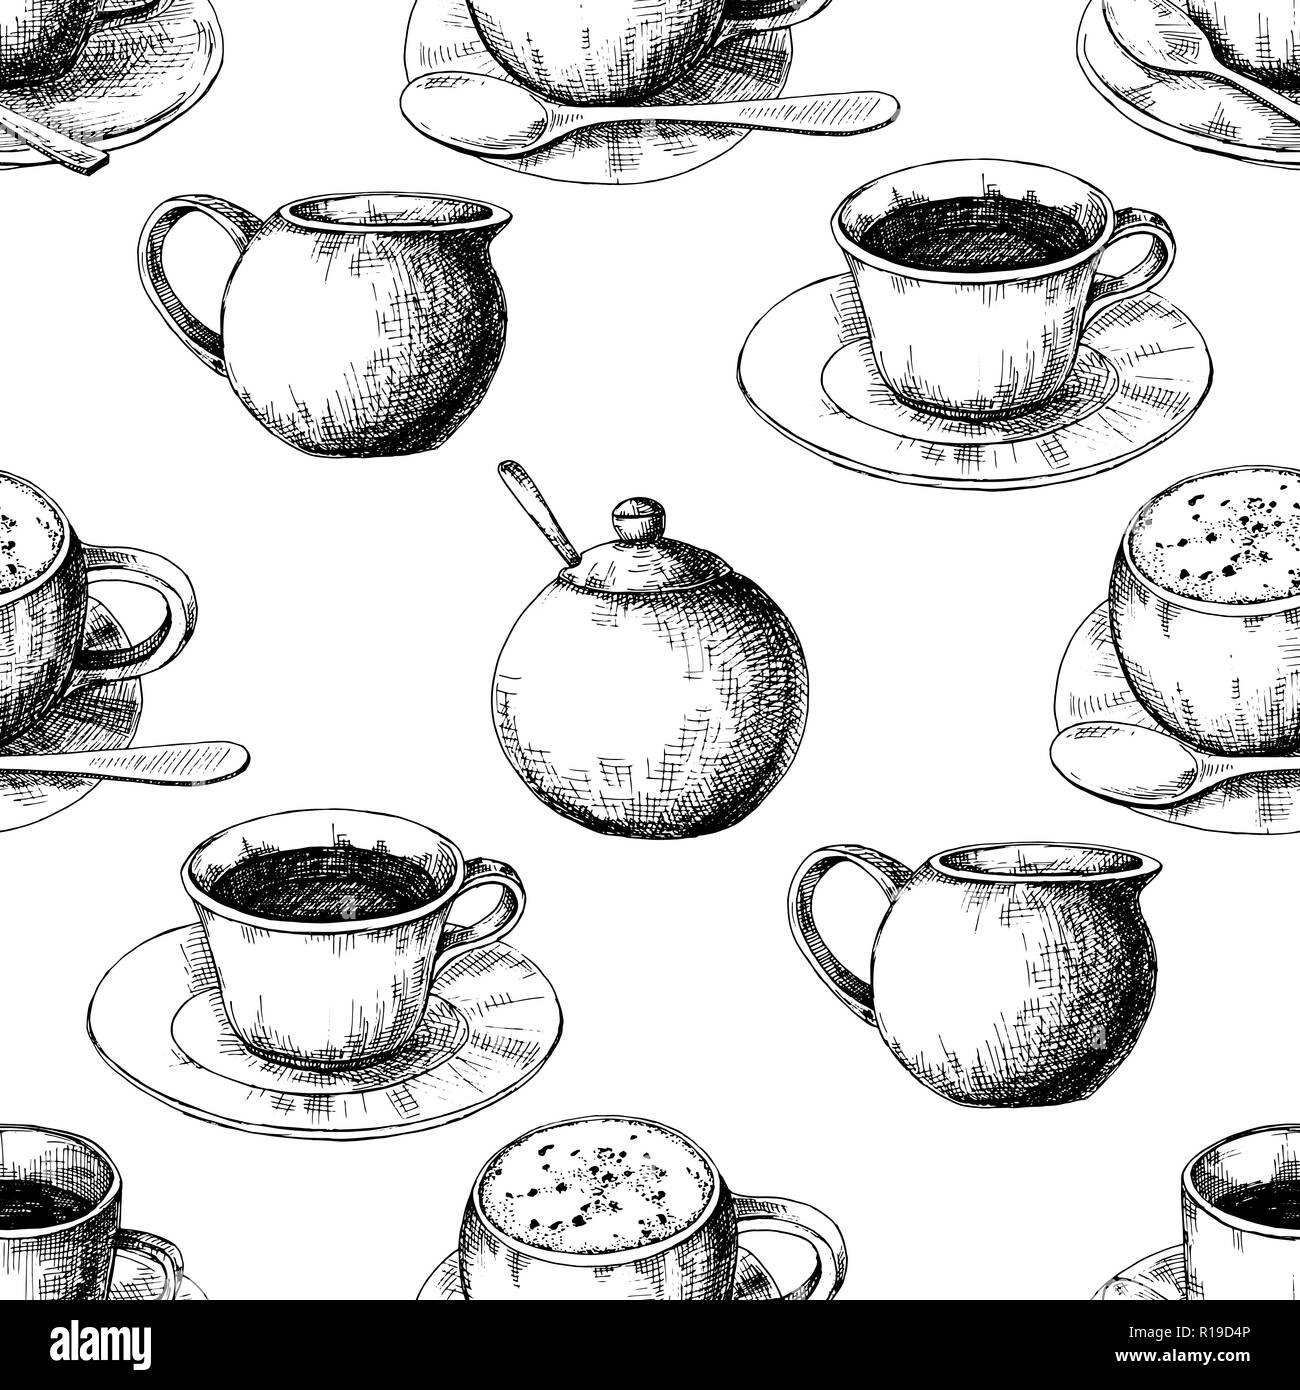 Seamless pattern. Sketch the different cups of coffee, coffee pots and other items. Stock Vector